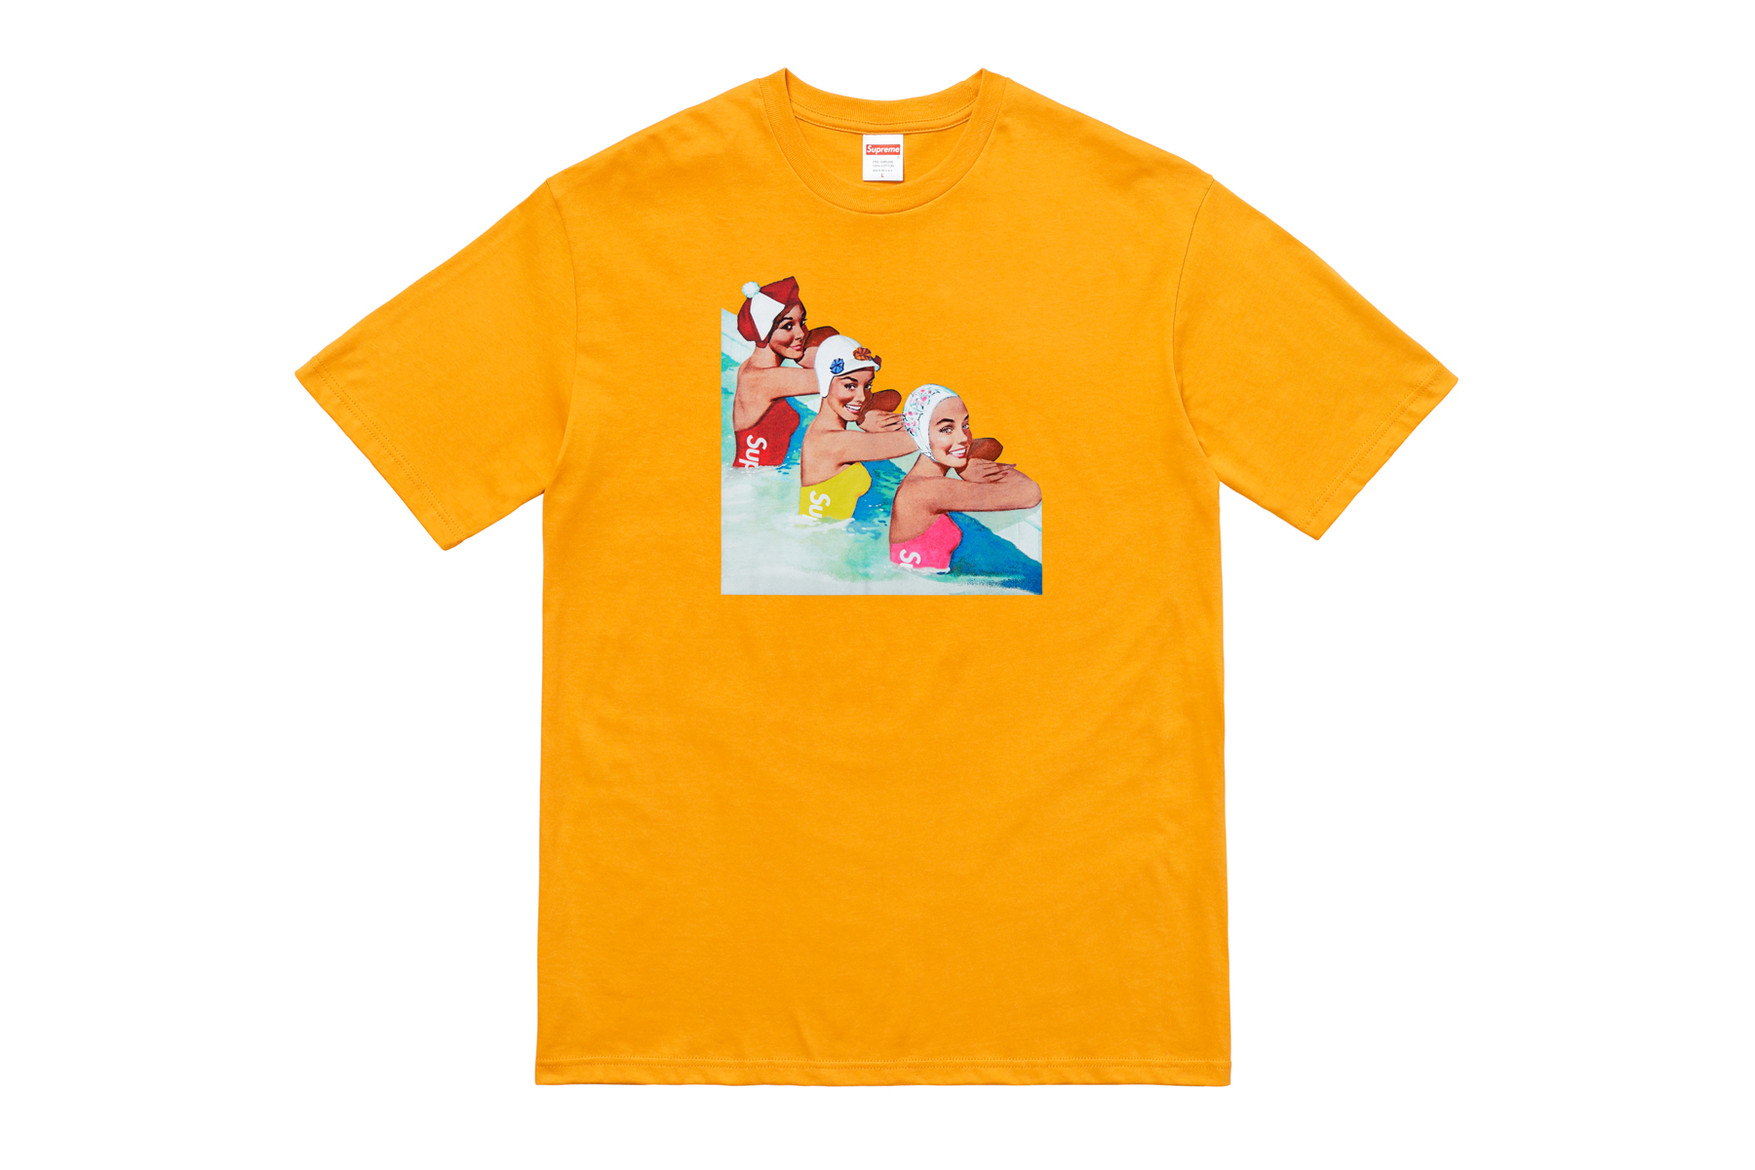 Supreme's Summer T-Shirts will drop with a good cause - ICON